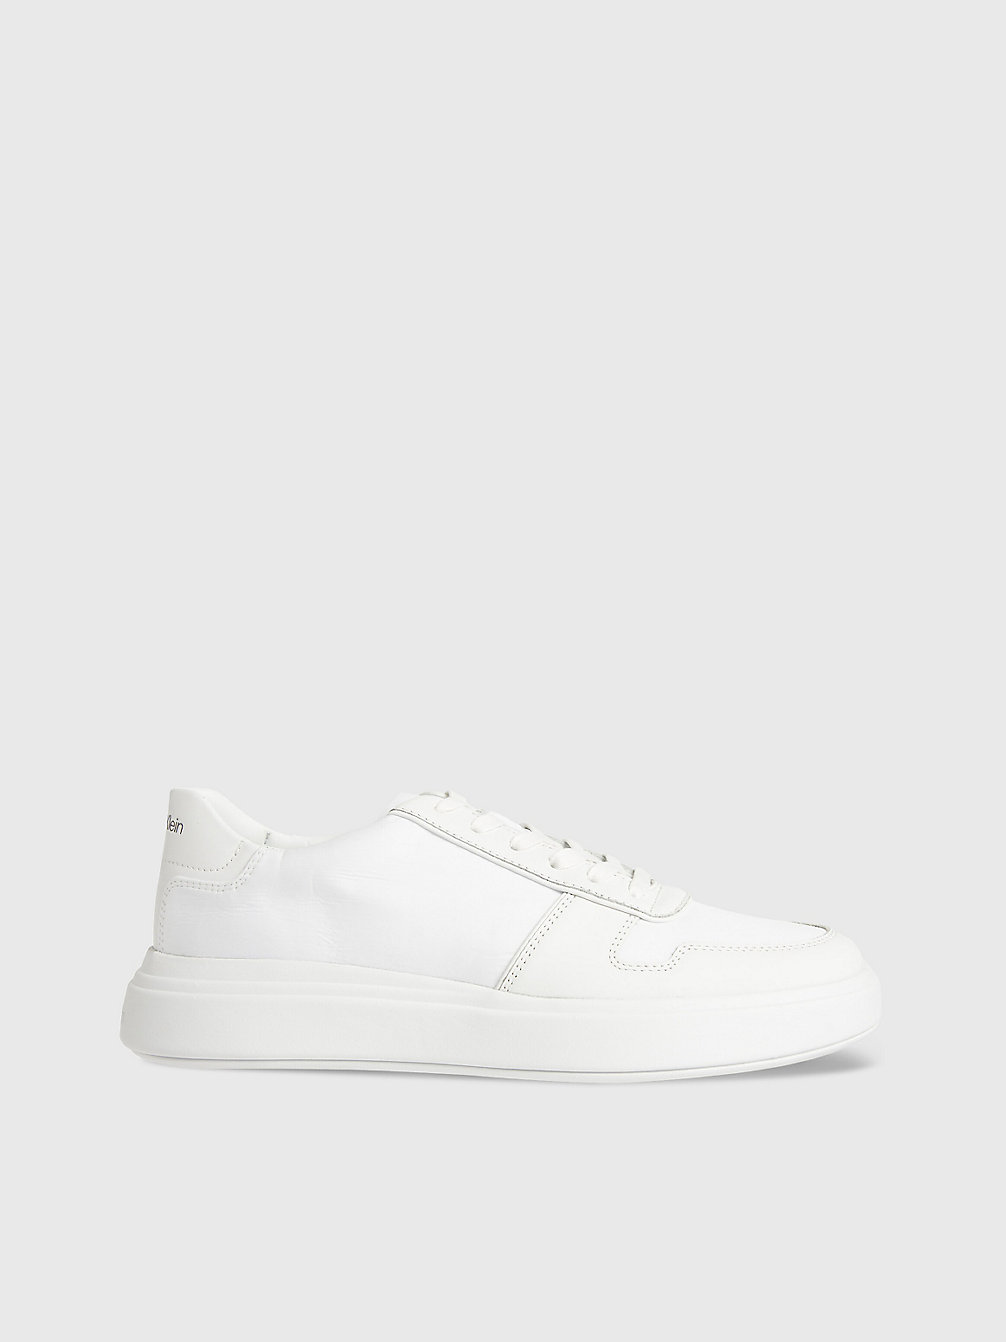 TRIPLE WHITE Leather Trainers undefined men Calvin Klein